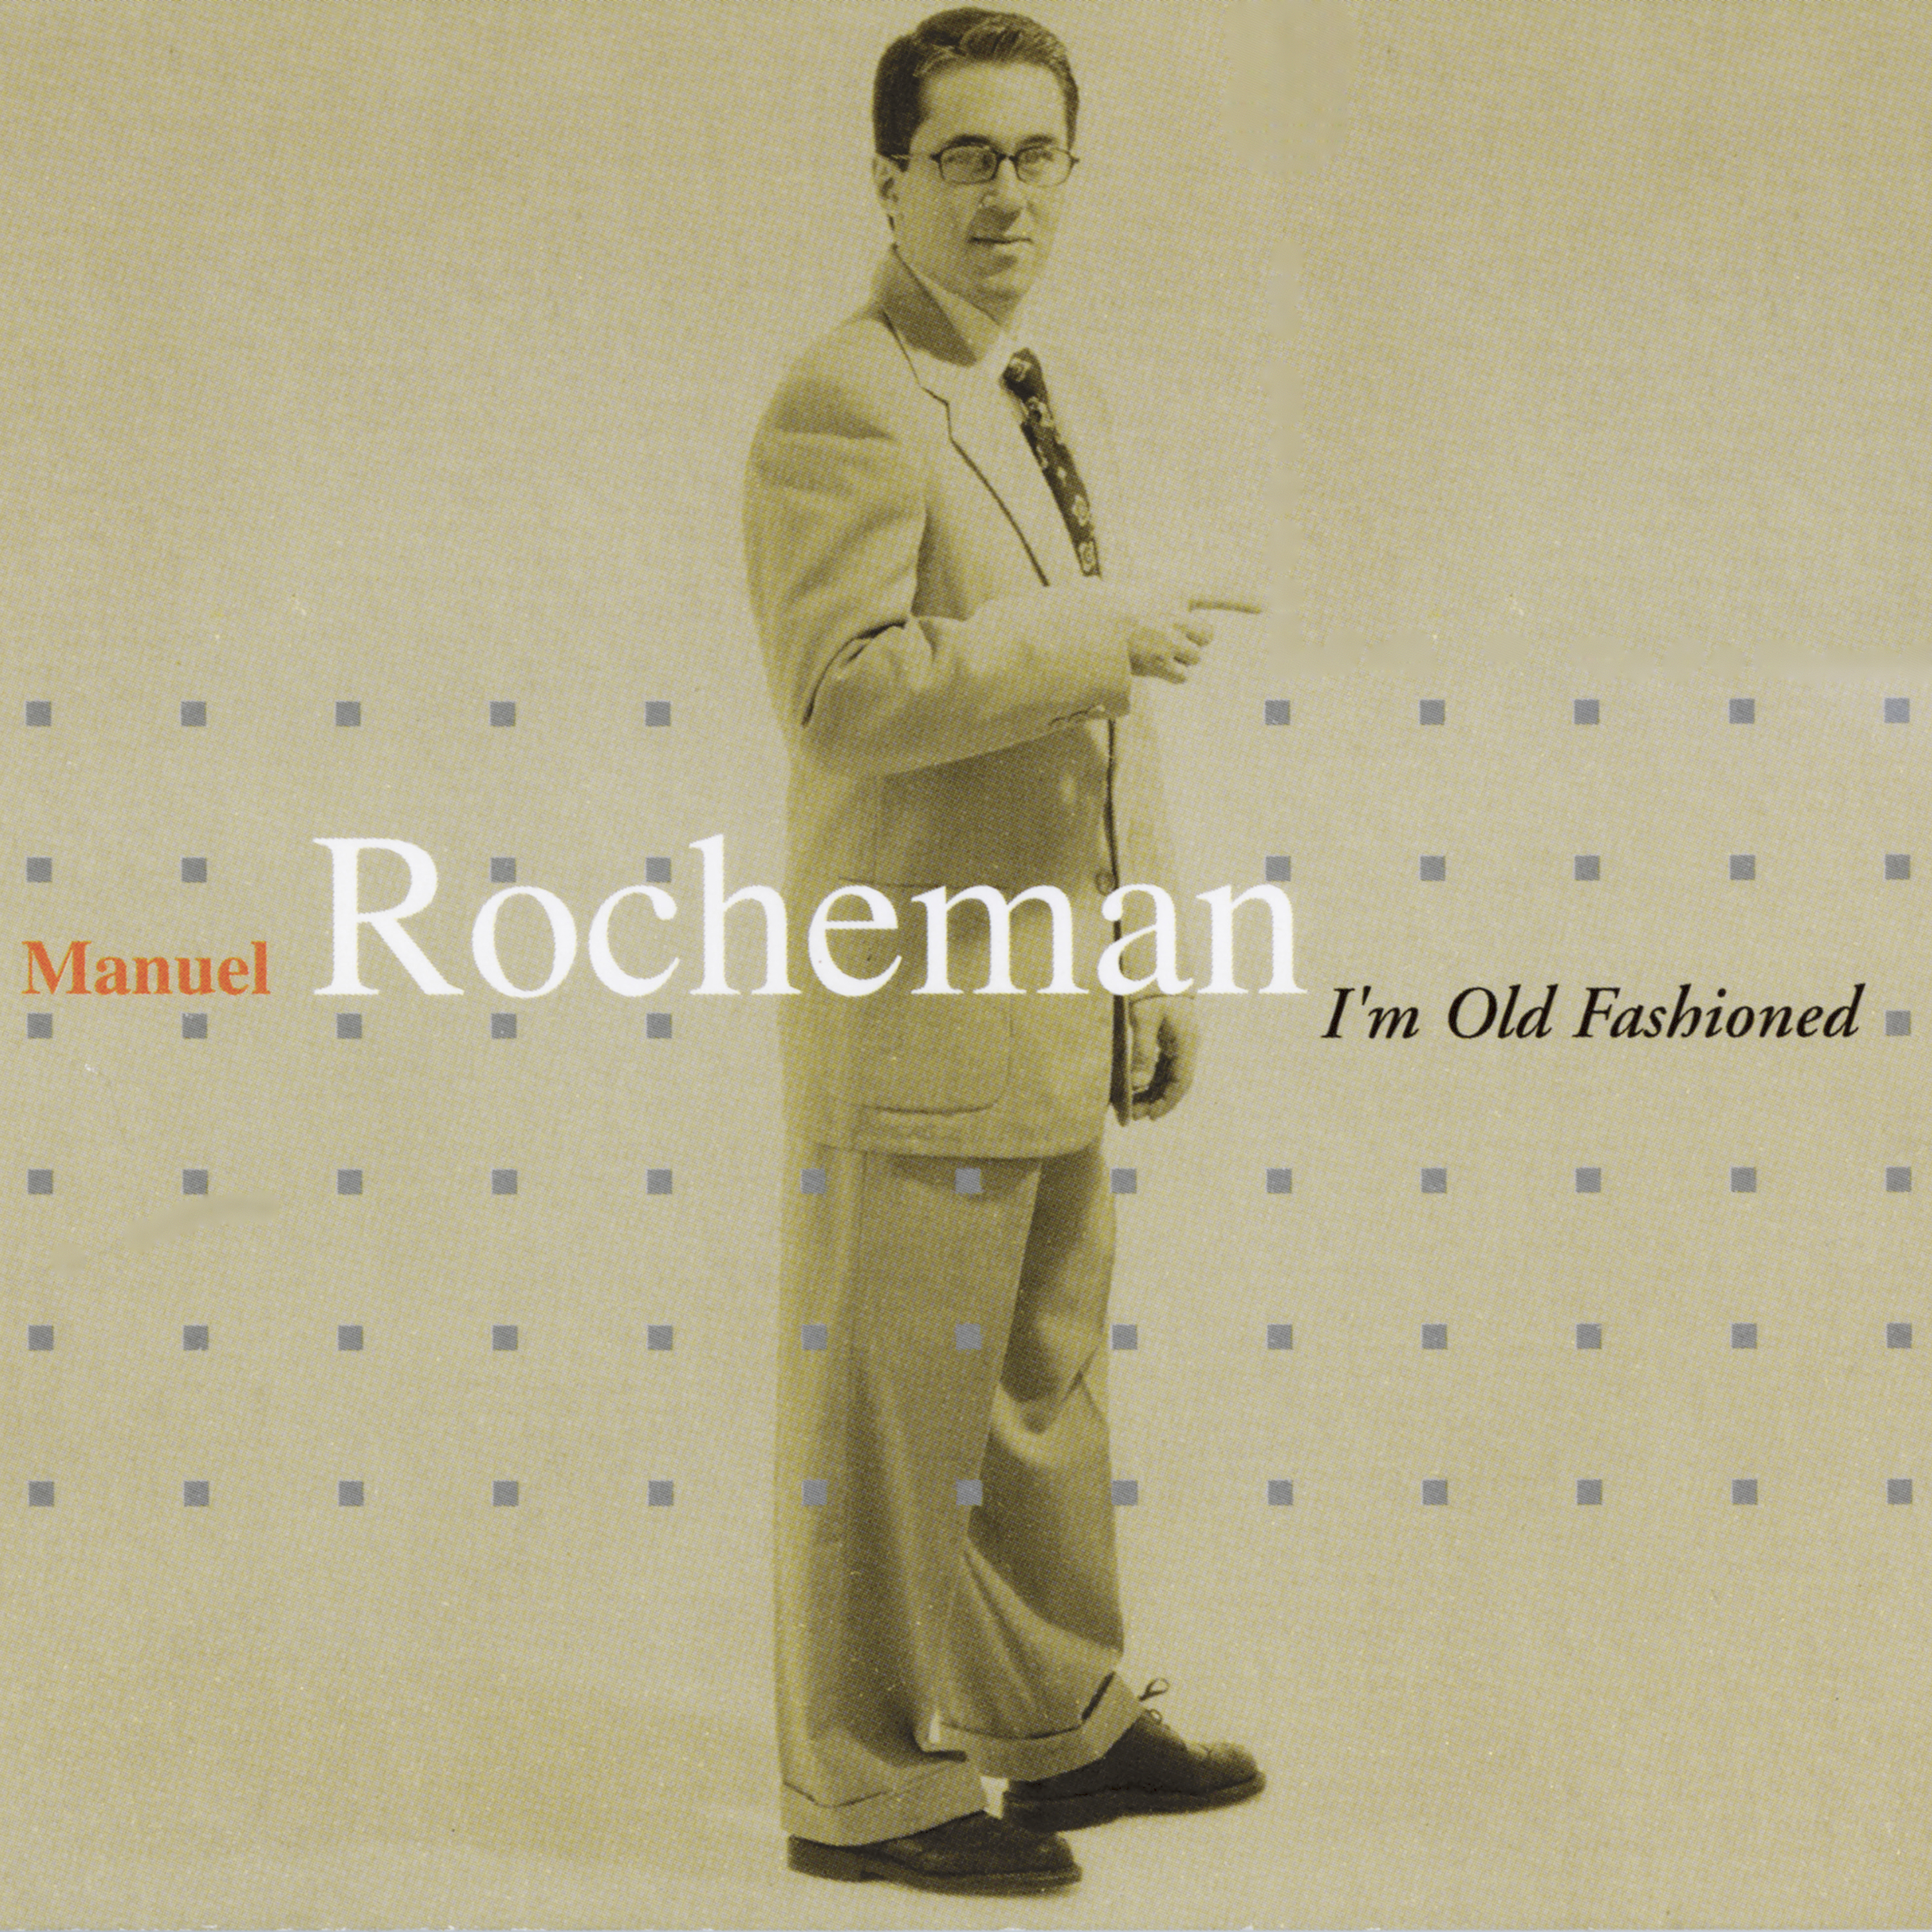 MANUEL ROCHEMAN - I'm Old Fashioned cover 